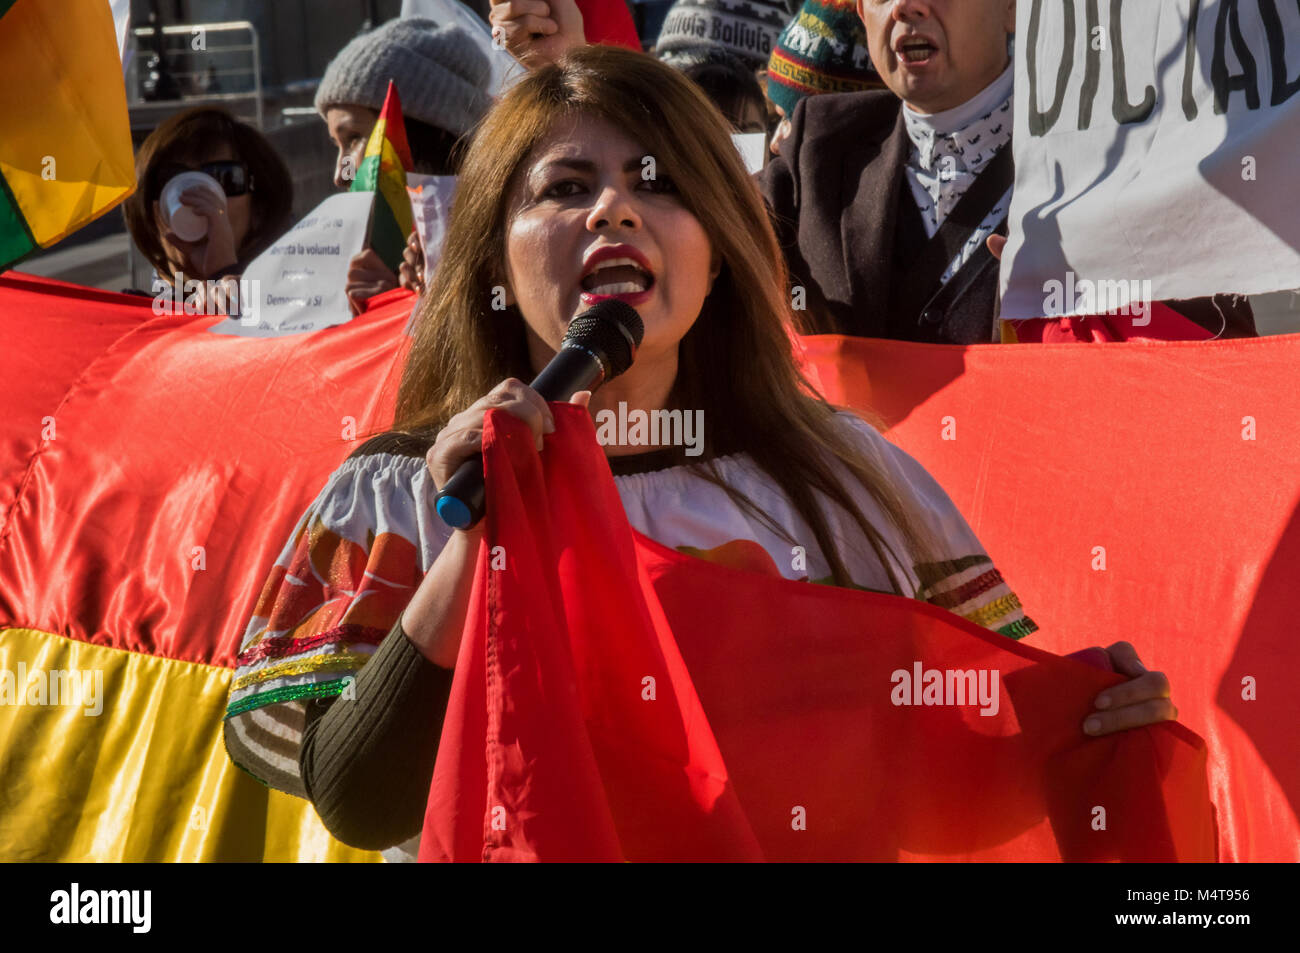 February 17, 2018 - London, UK. 17th February 2018. Bolivians protest in Trafalgar Square against President Evo Morales who won a Supreme Court appeal which will allow him to run for a fourth term in 2019 after a referendum on 21st February 2016 had voted down the constitutional change. The government argued it had lost because of an illegal defamatory campaign against Morales who is the country's first indigenous leader, in office since 2006, and says he needs more time in power in order to consolidate his party's programme of of social reforms. The protesters accuse him of wanting to be a d  Stock Photo